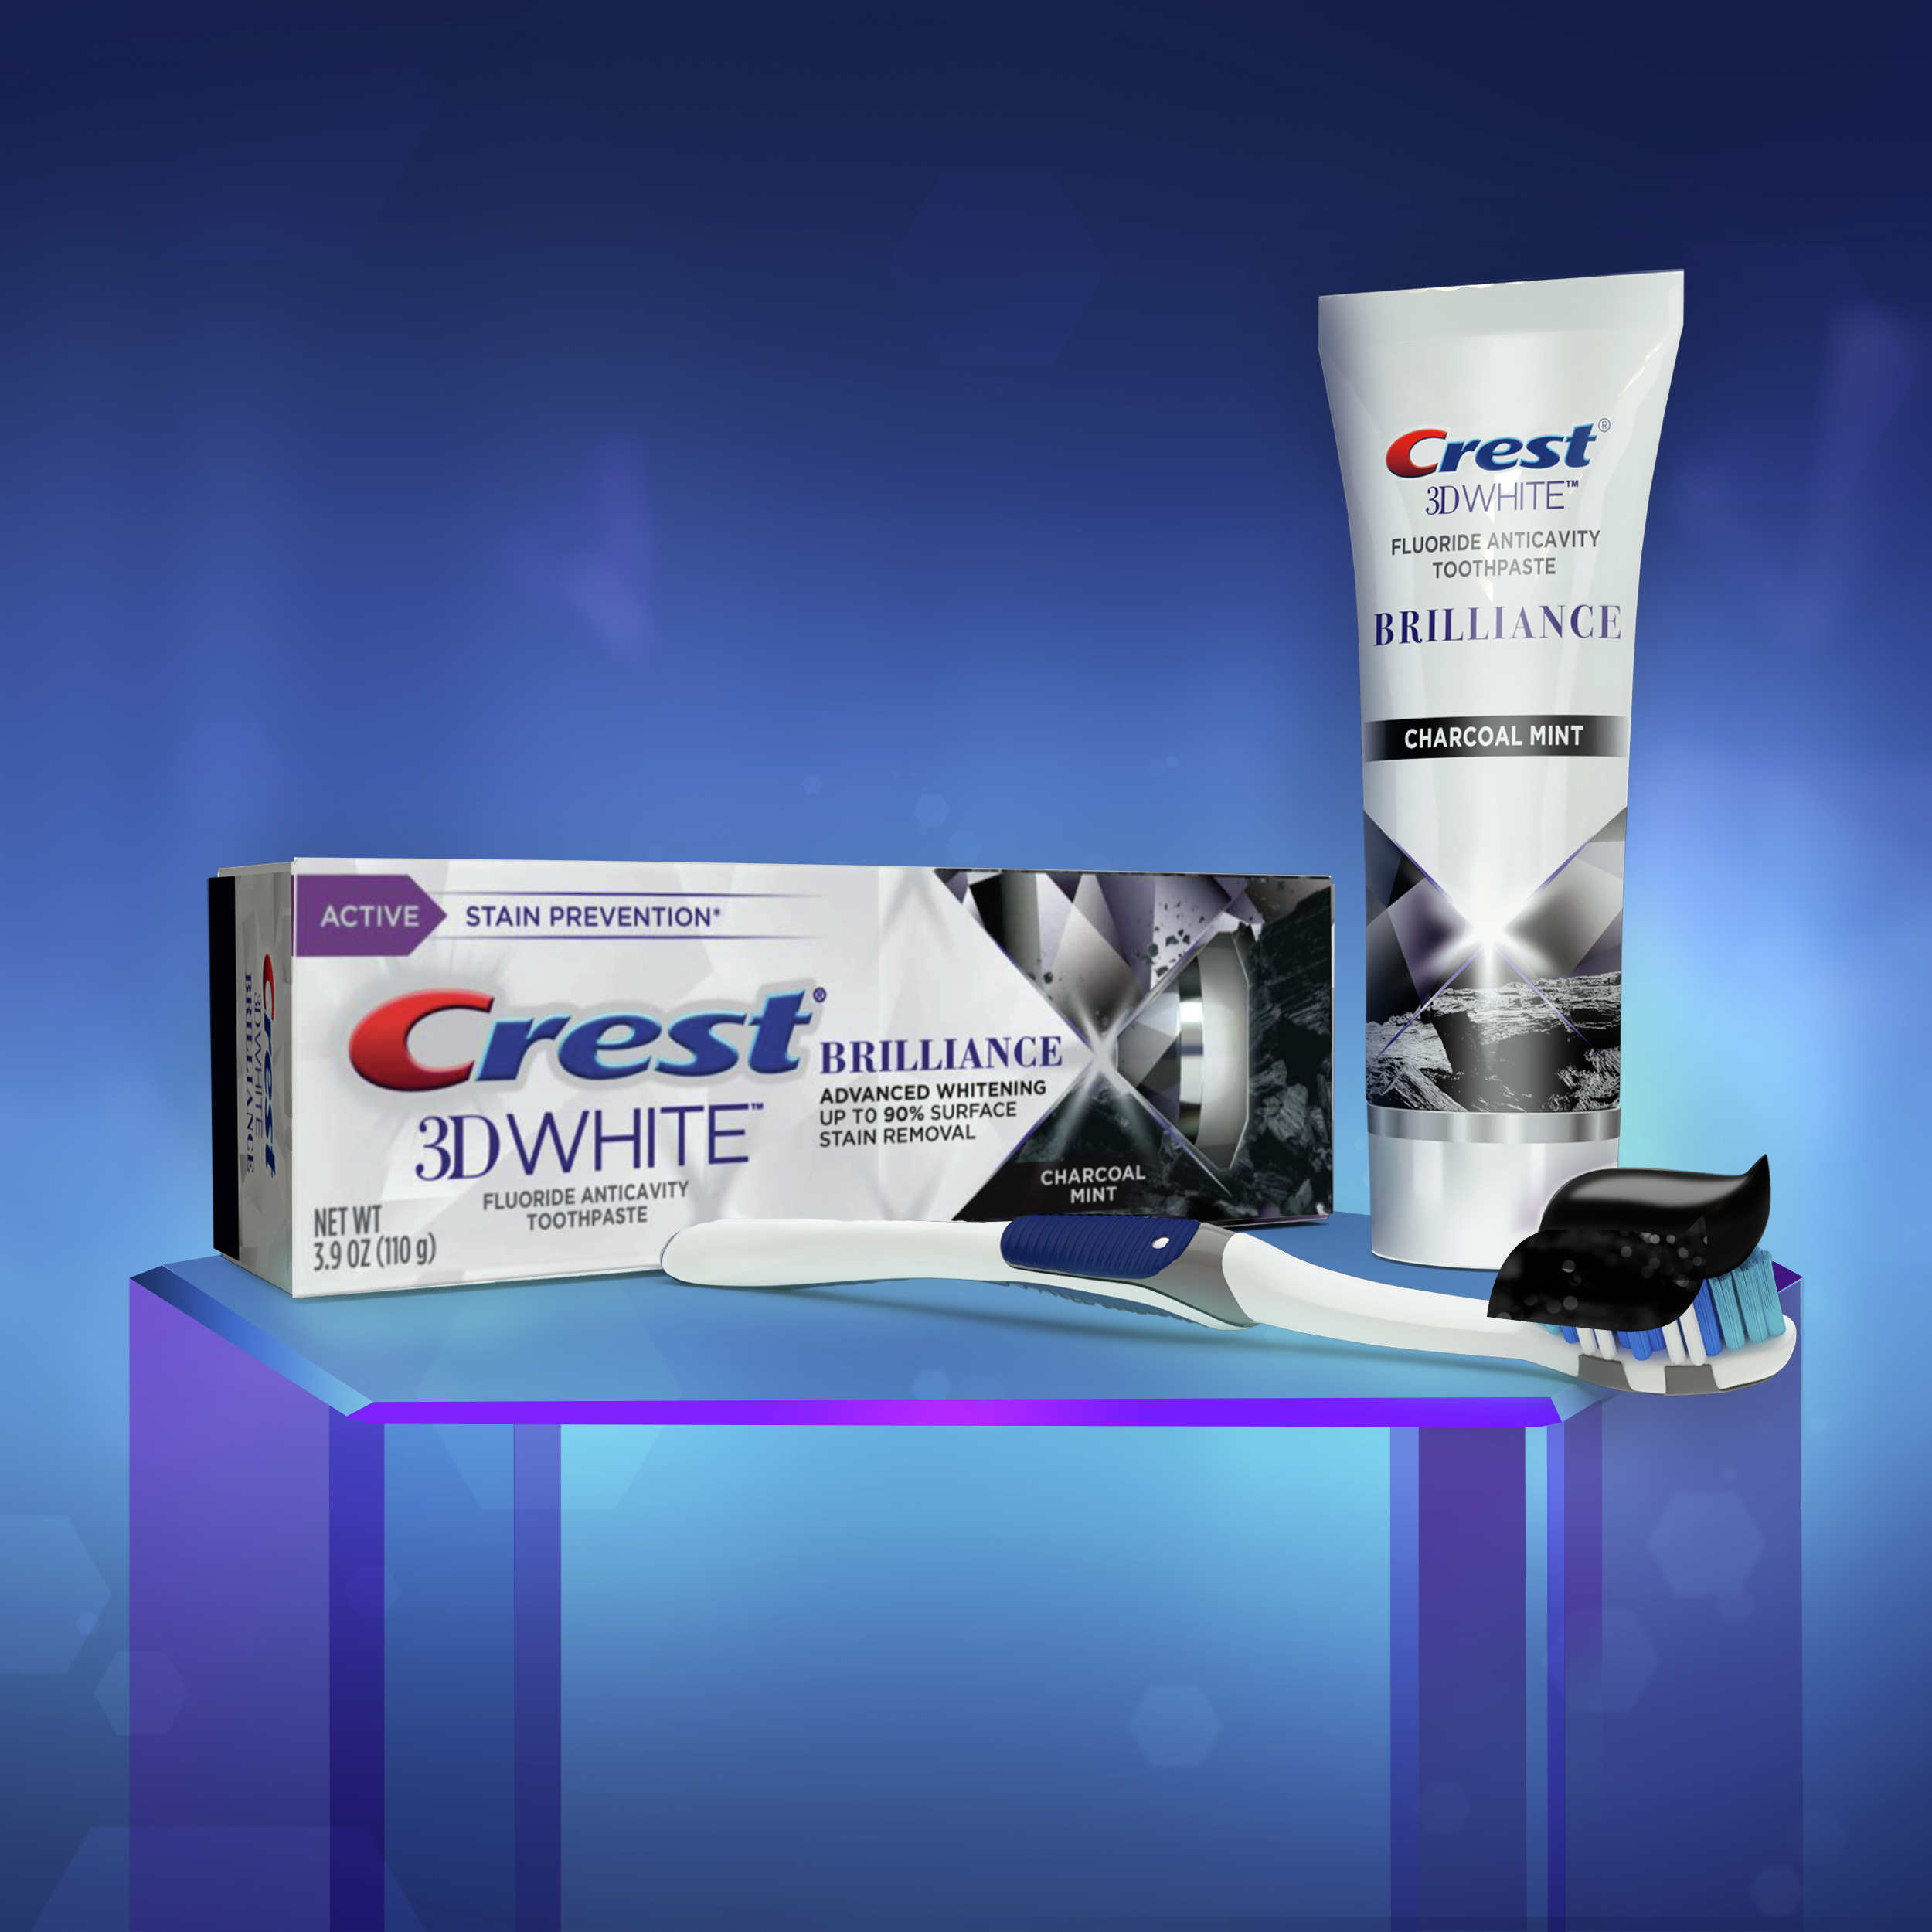 Crest 3D White Brilliance Charcoal Teeth Whitening Toothpaste, Mint, 3.9 oz - image 3 of 11